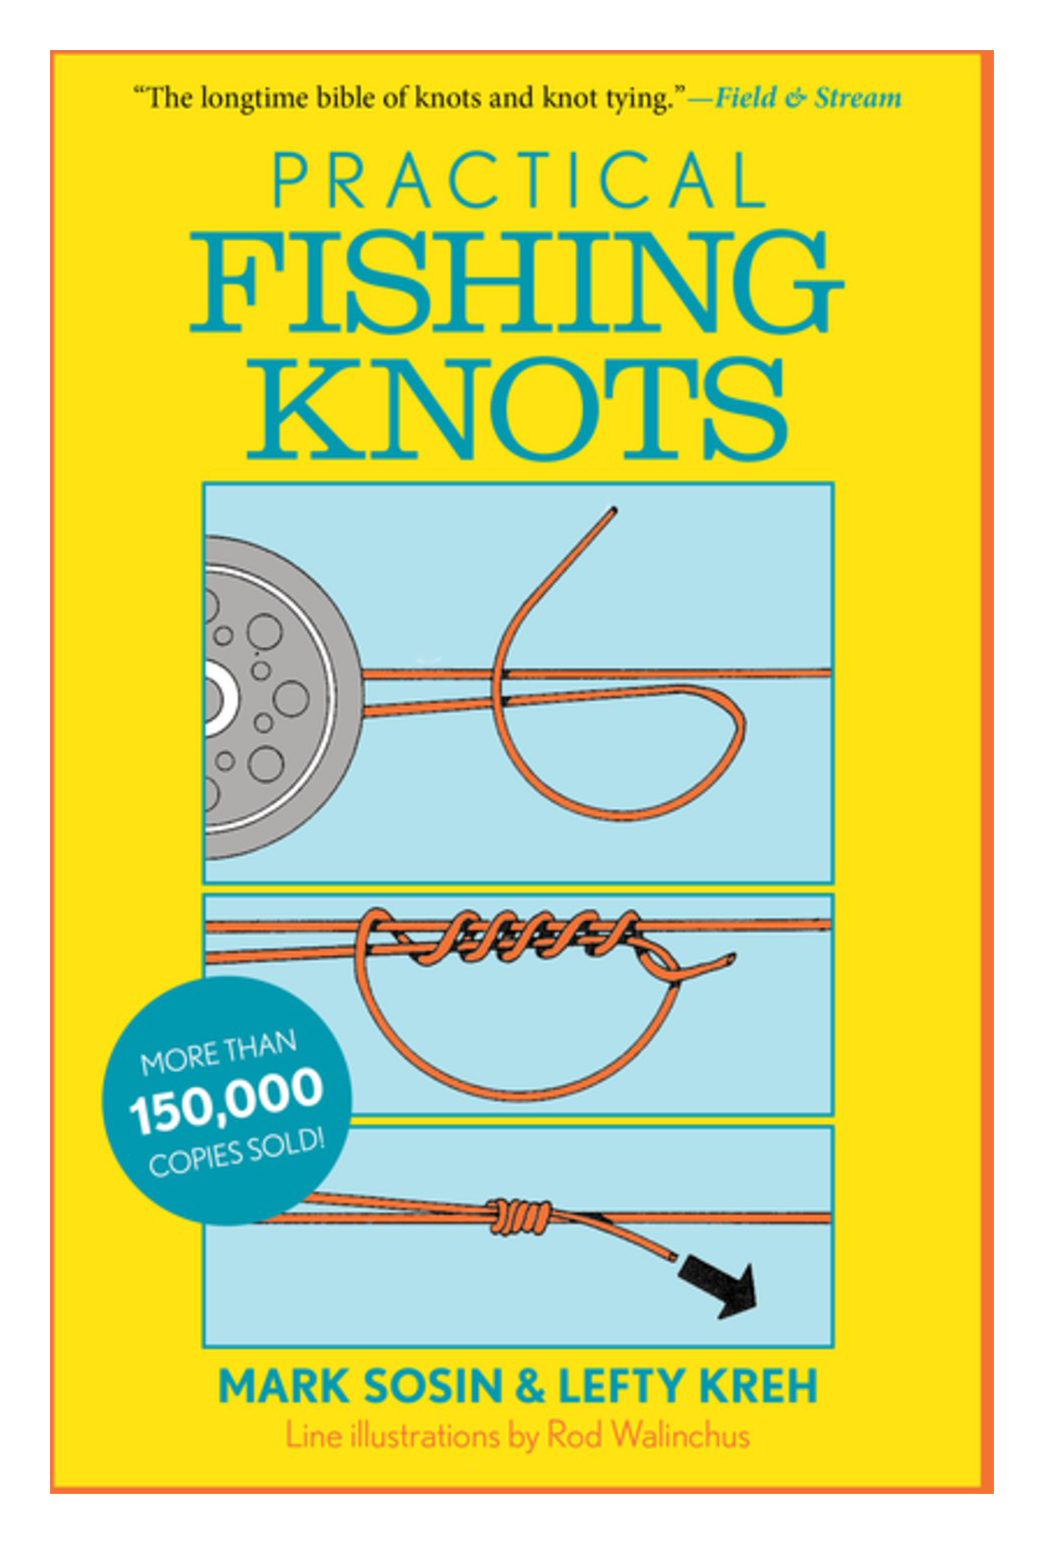 Practical Fishing Knots Book by Mark Sosin and Lefty Kreh